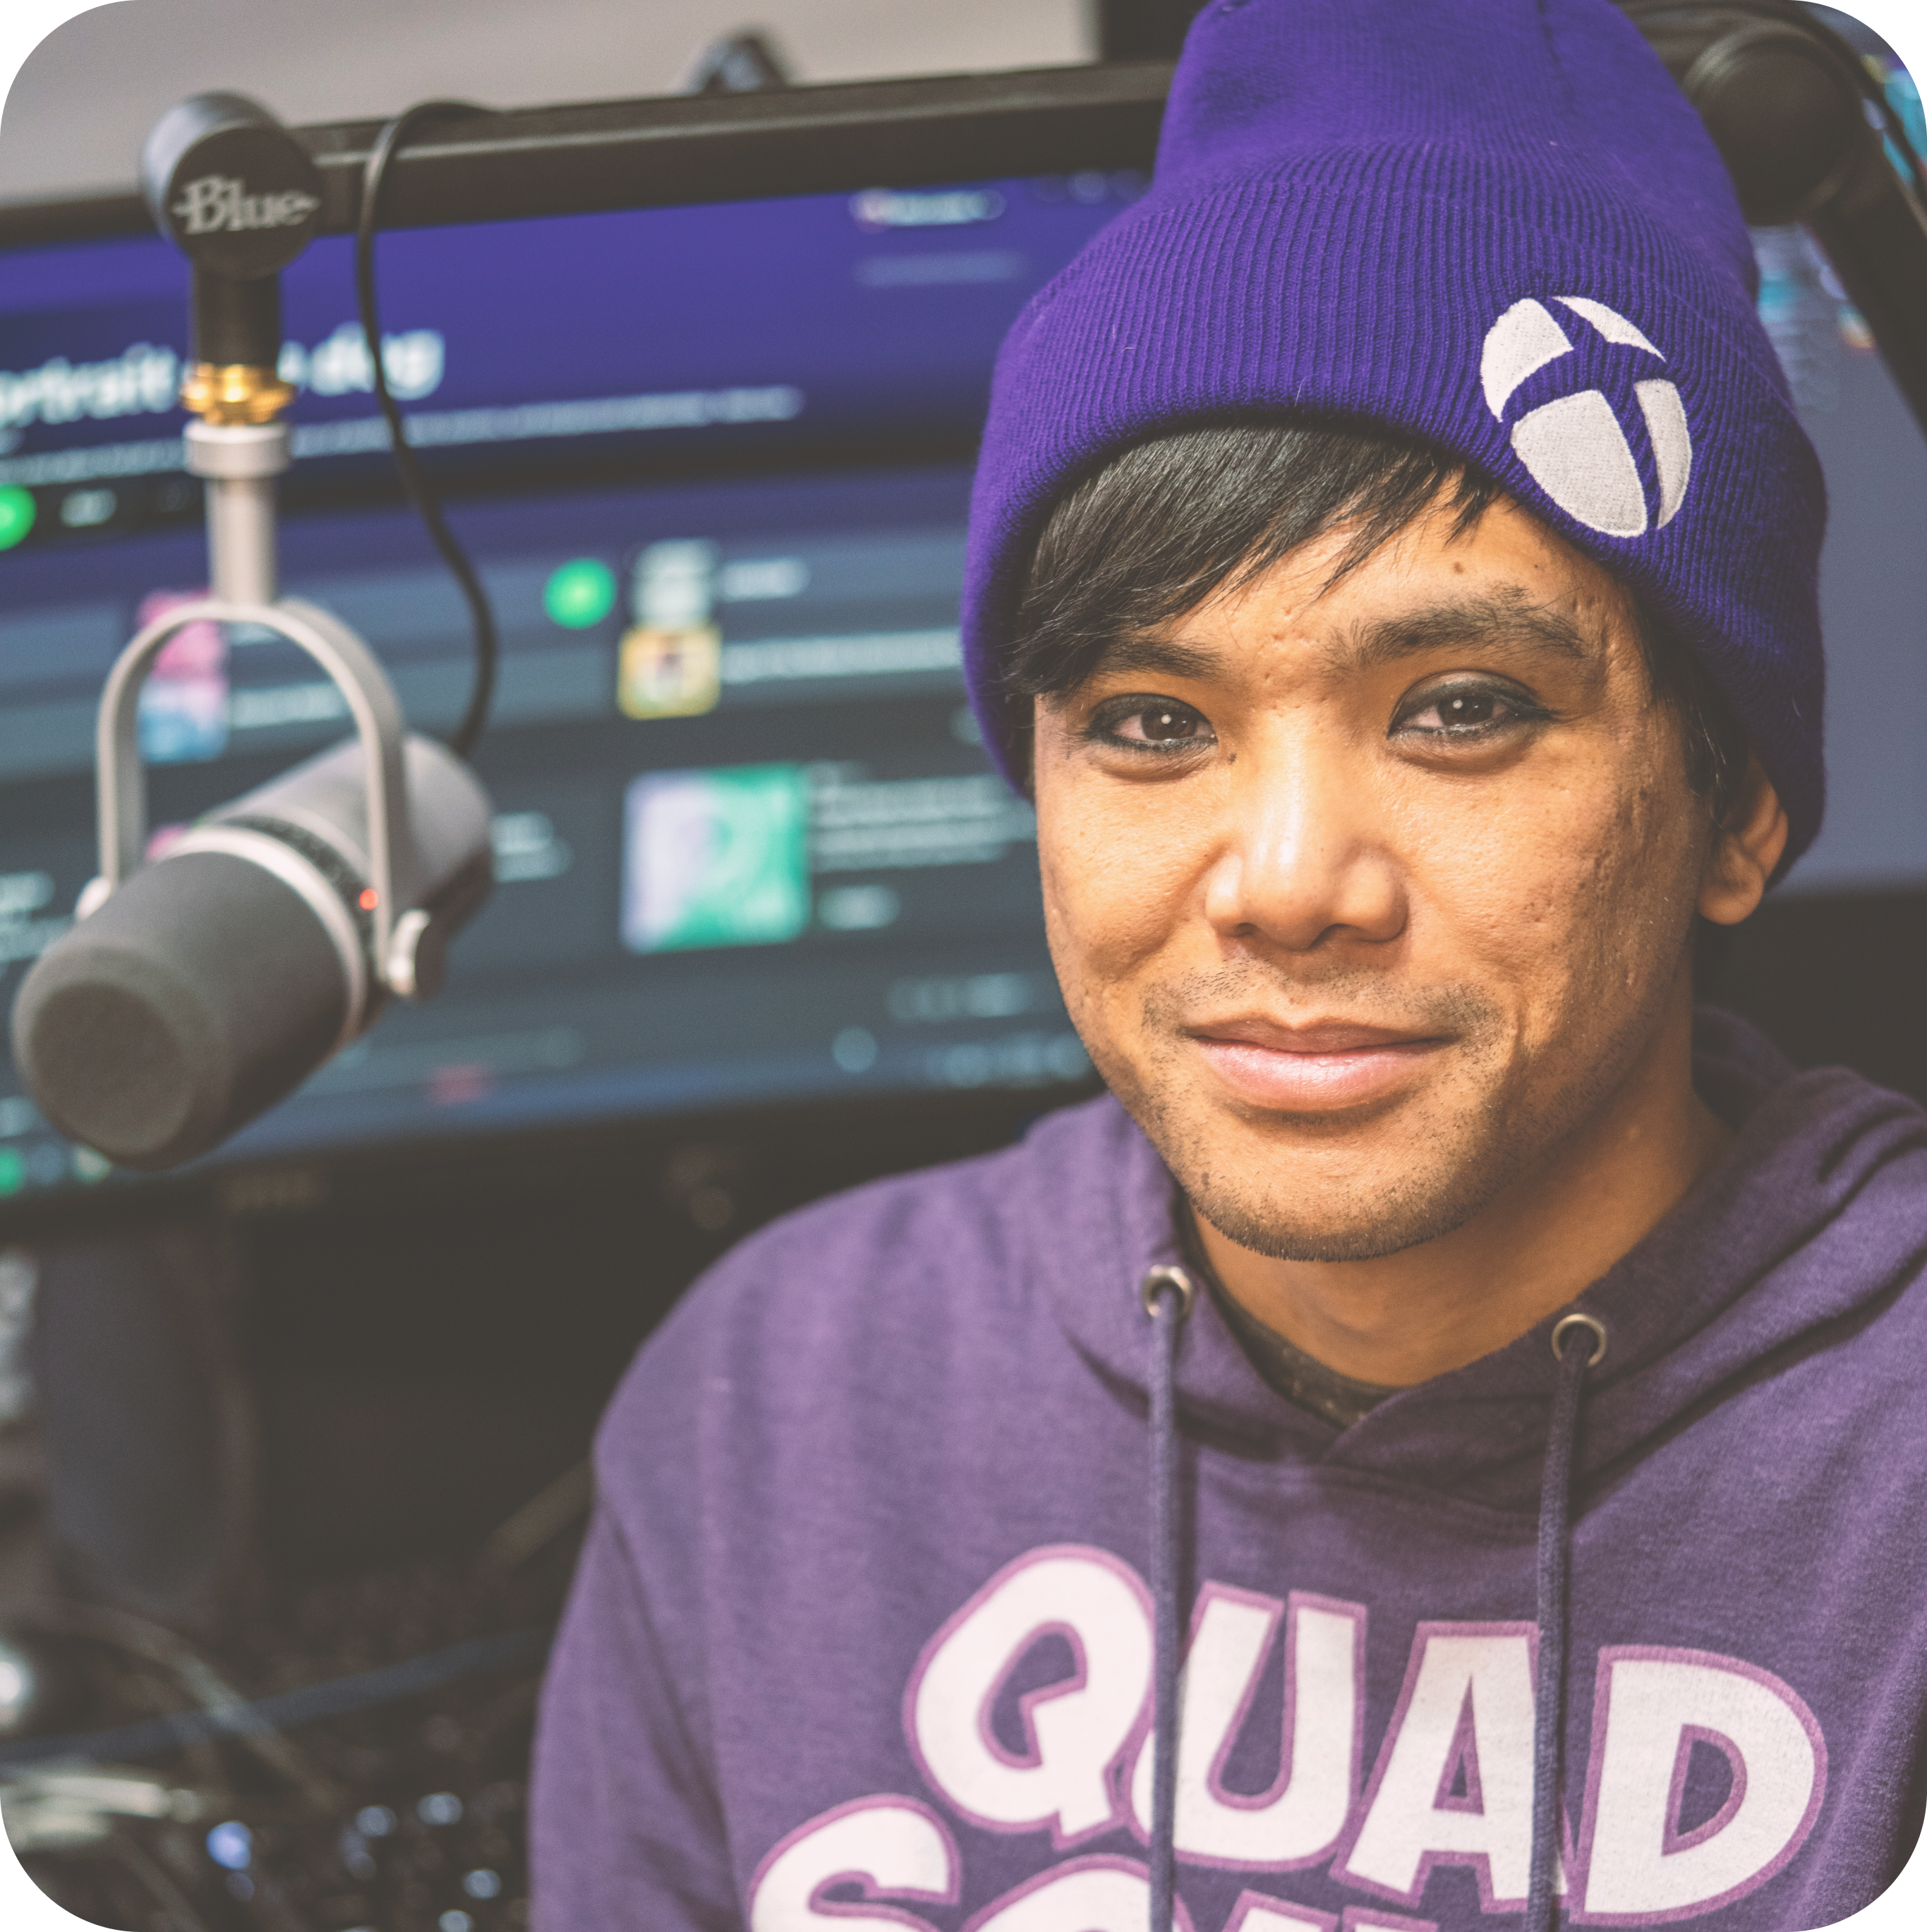 Mike is a man with brown eyes and short brown hair with sidebangs. He's wearing a purple tuque with the Xbox logo and a purple hoodie that reads Quad Squad. There's a microphone on a boom to his left, a television behind him, and he's smiling at the camera.